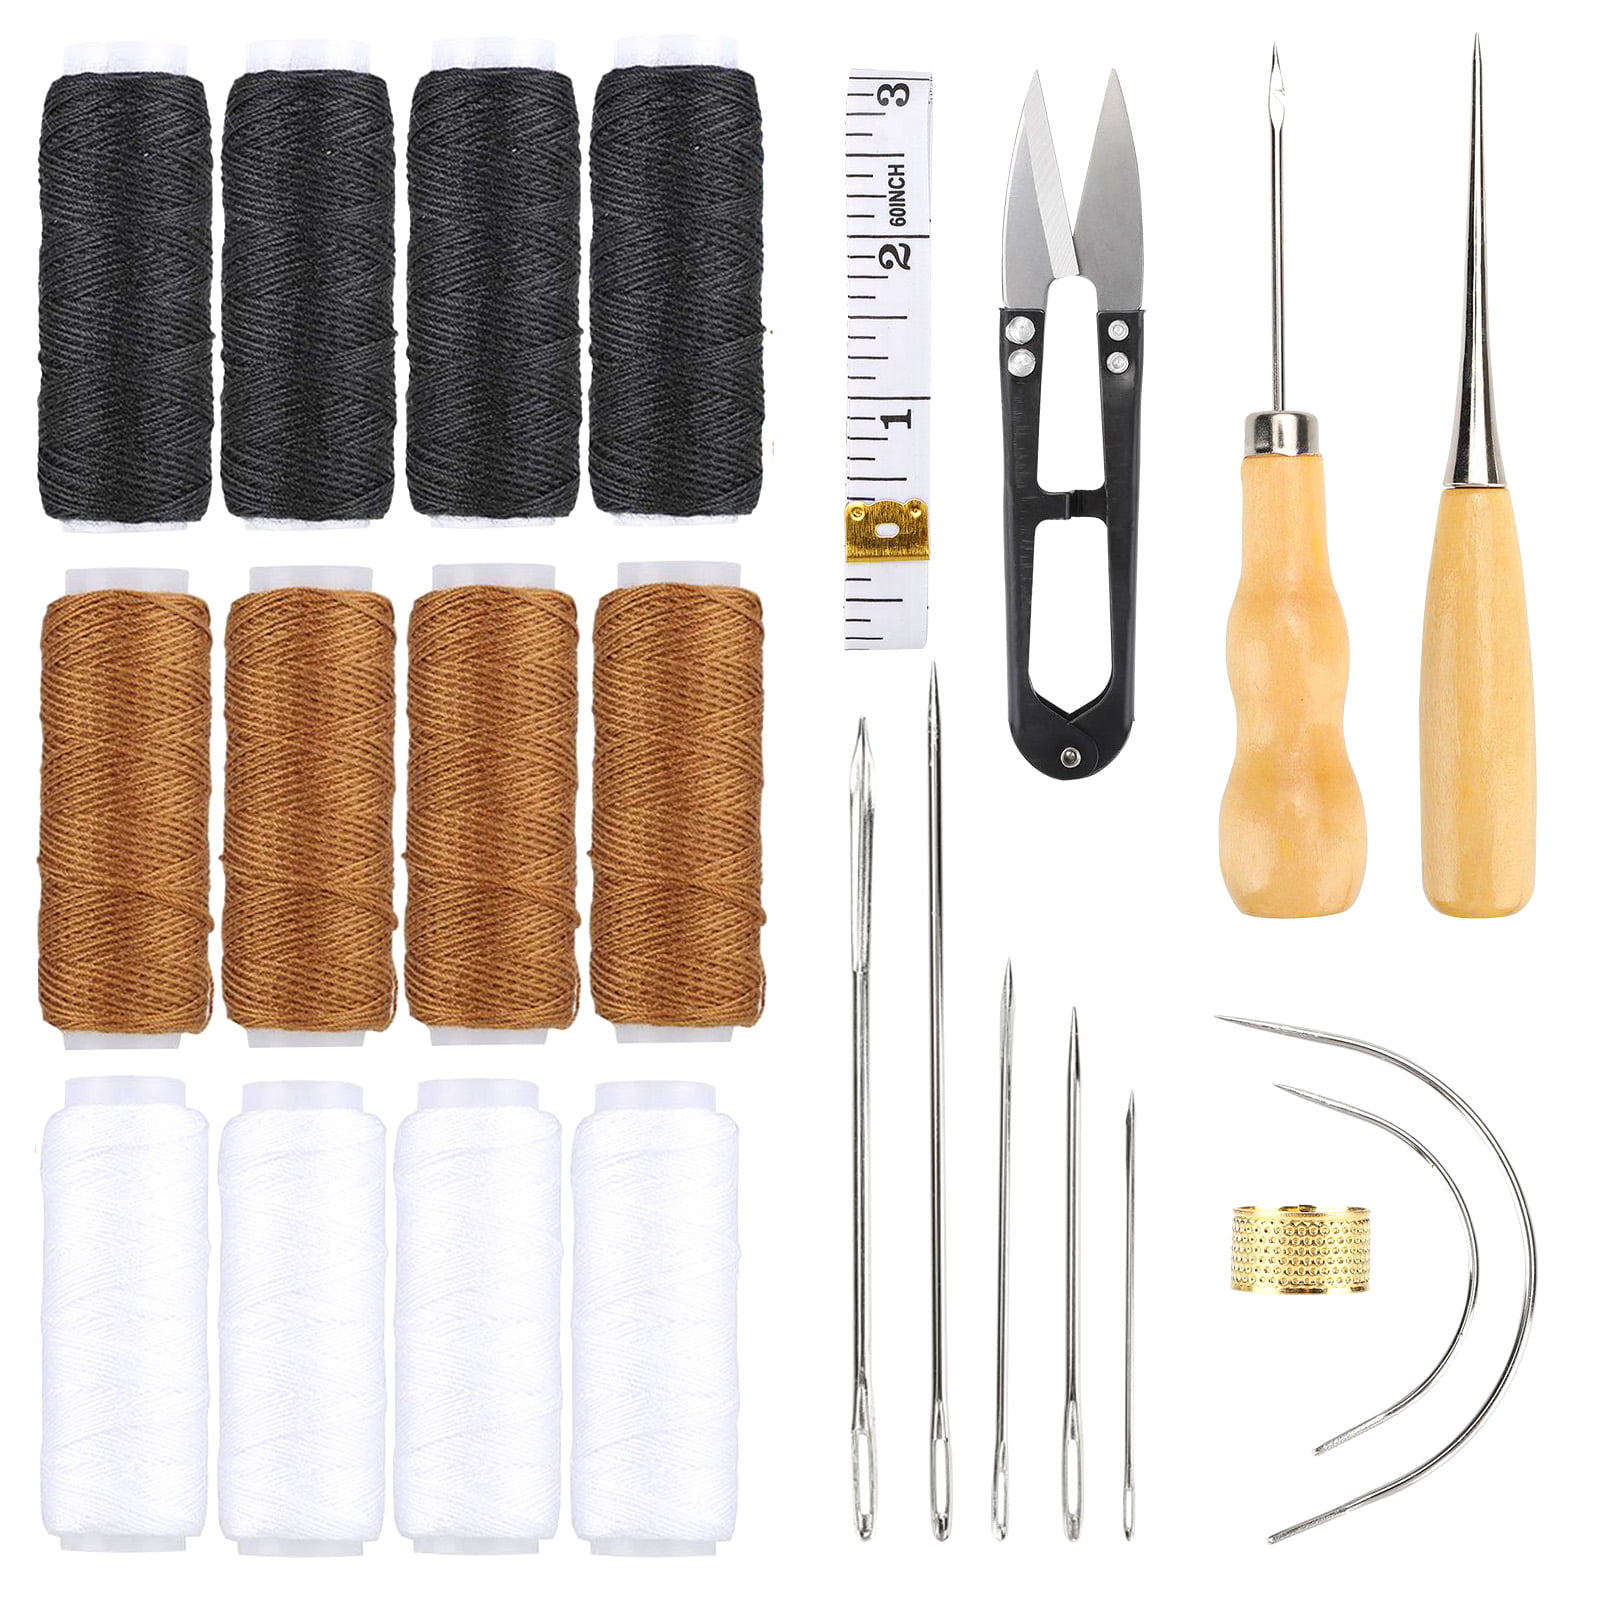 Betfandeful 15PCS Upholstery Repair Kit Leather Sewing Kit Sewing Needles Upholstery Thread Assorted Hand Sewing Needles Kit 